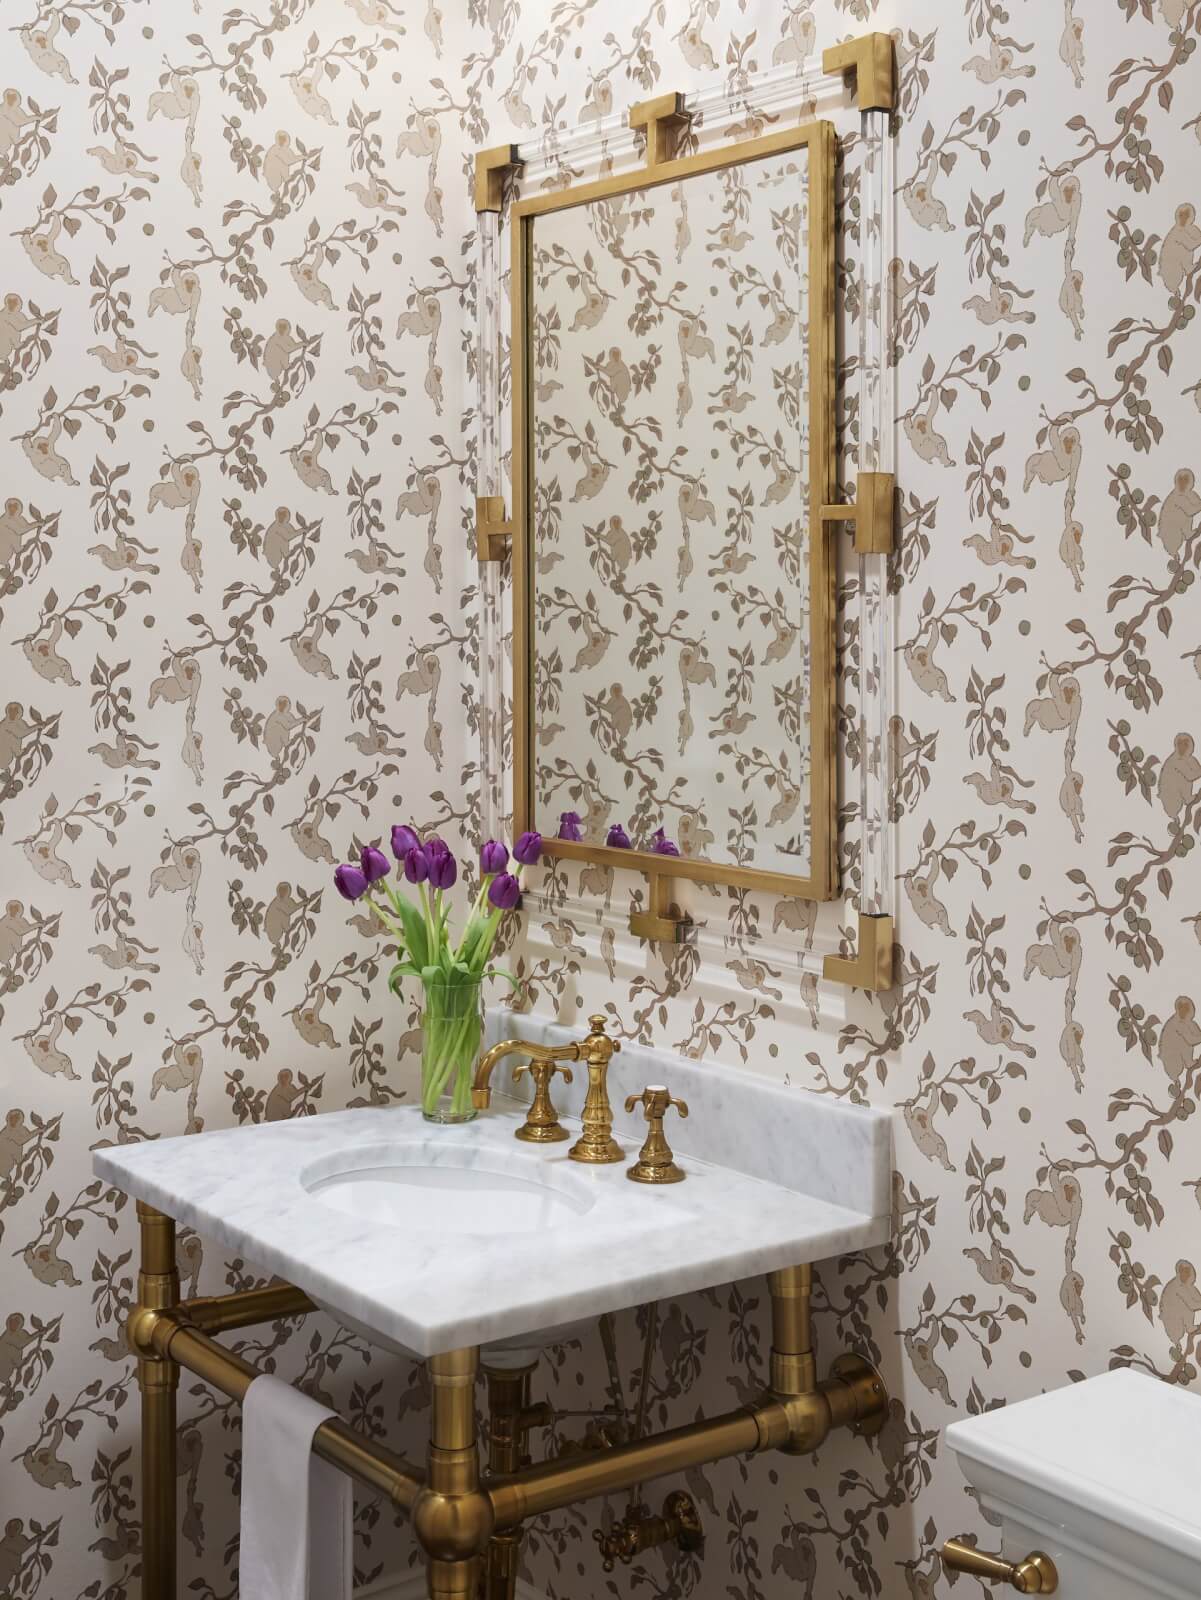 Gold-embellished powder room with purple tulips on the bathroom sink.